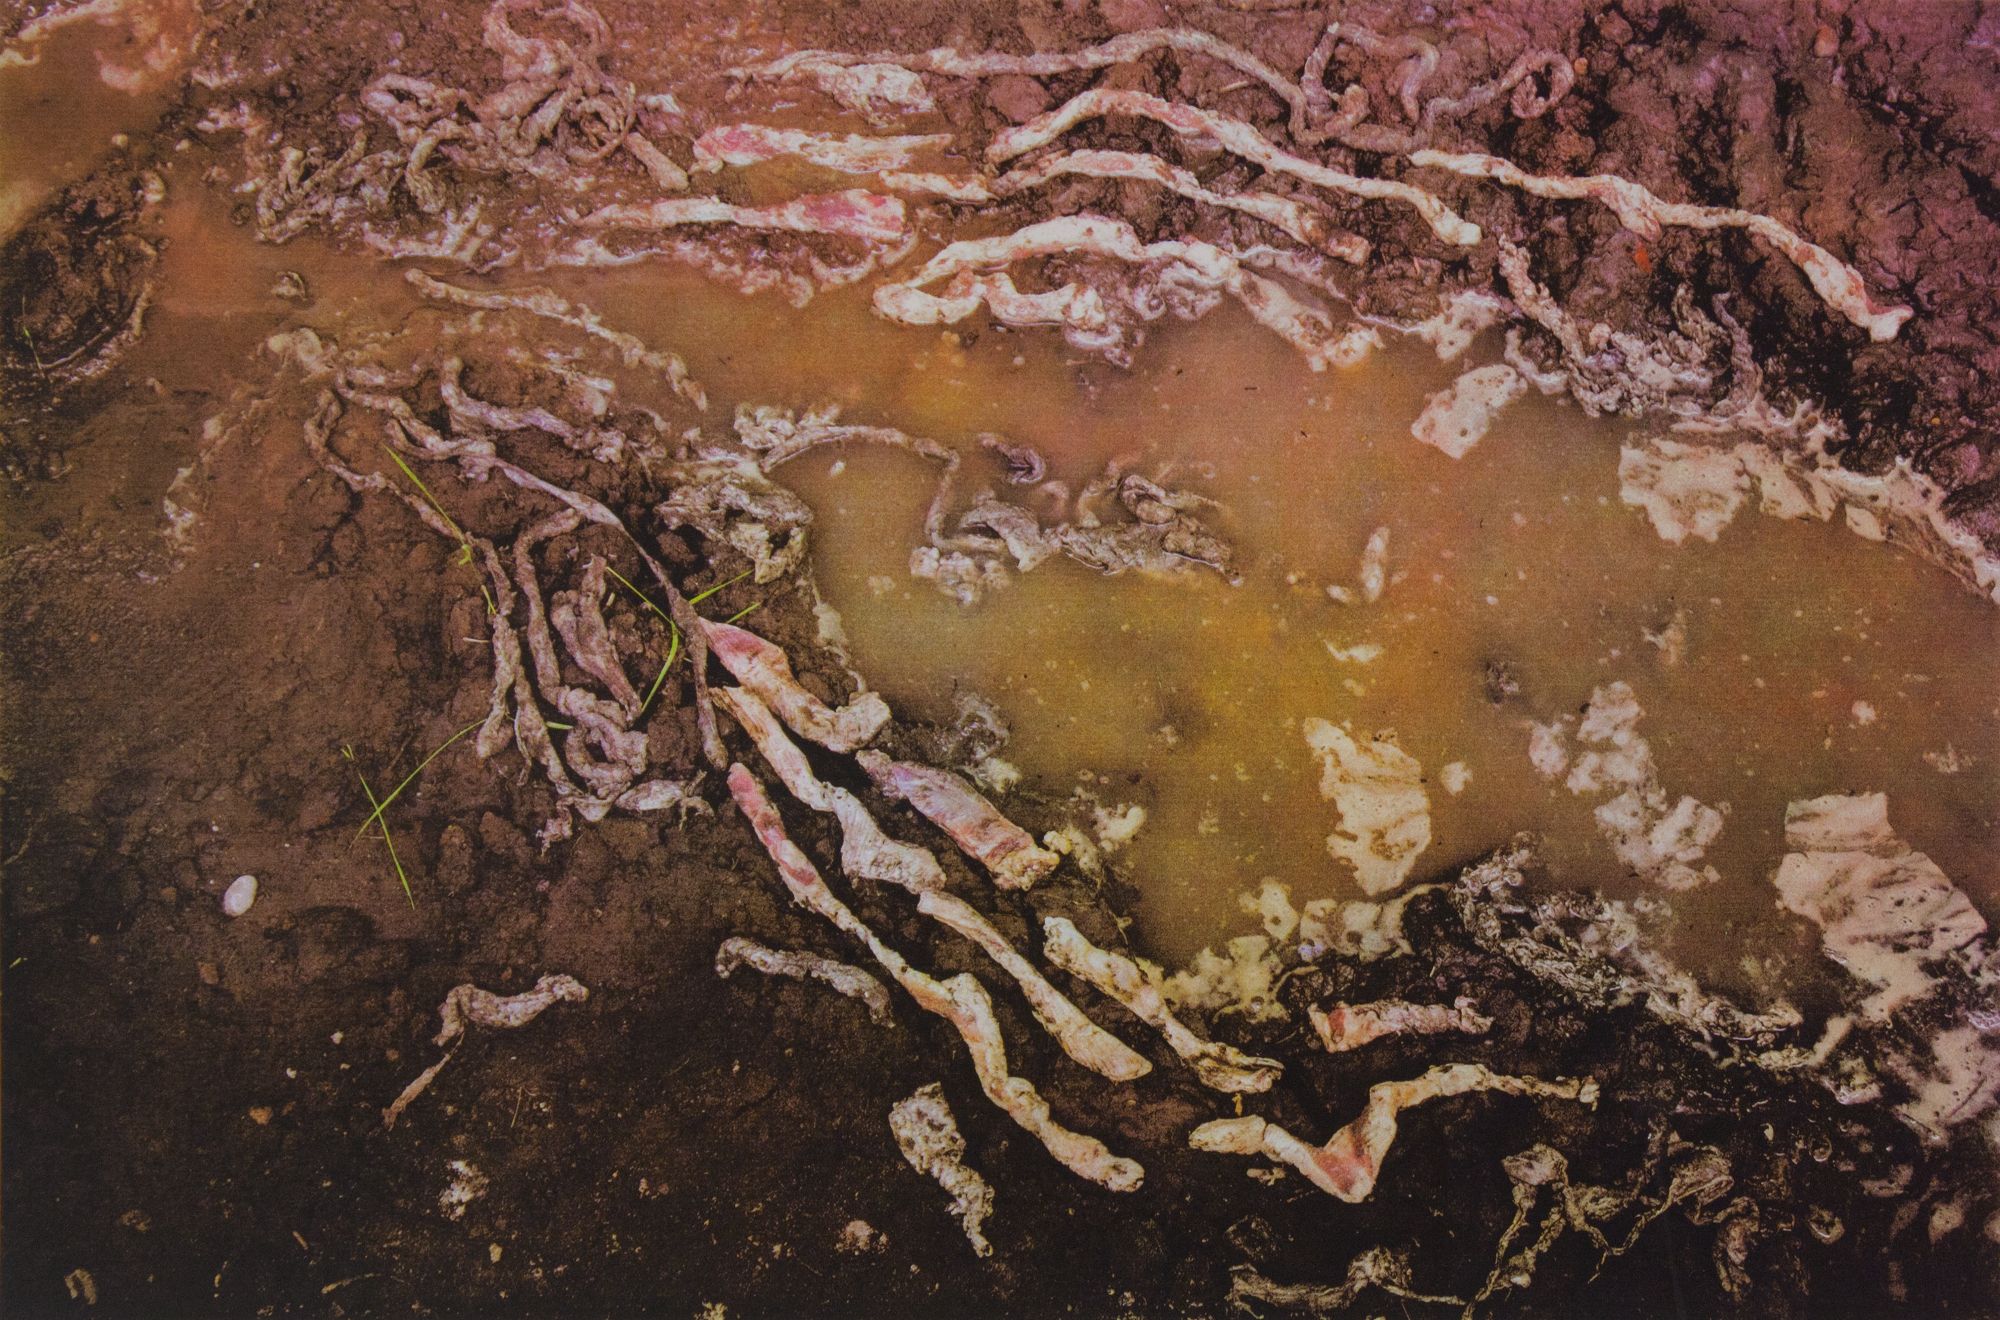 Meat, Mud and Water III